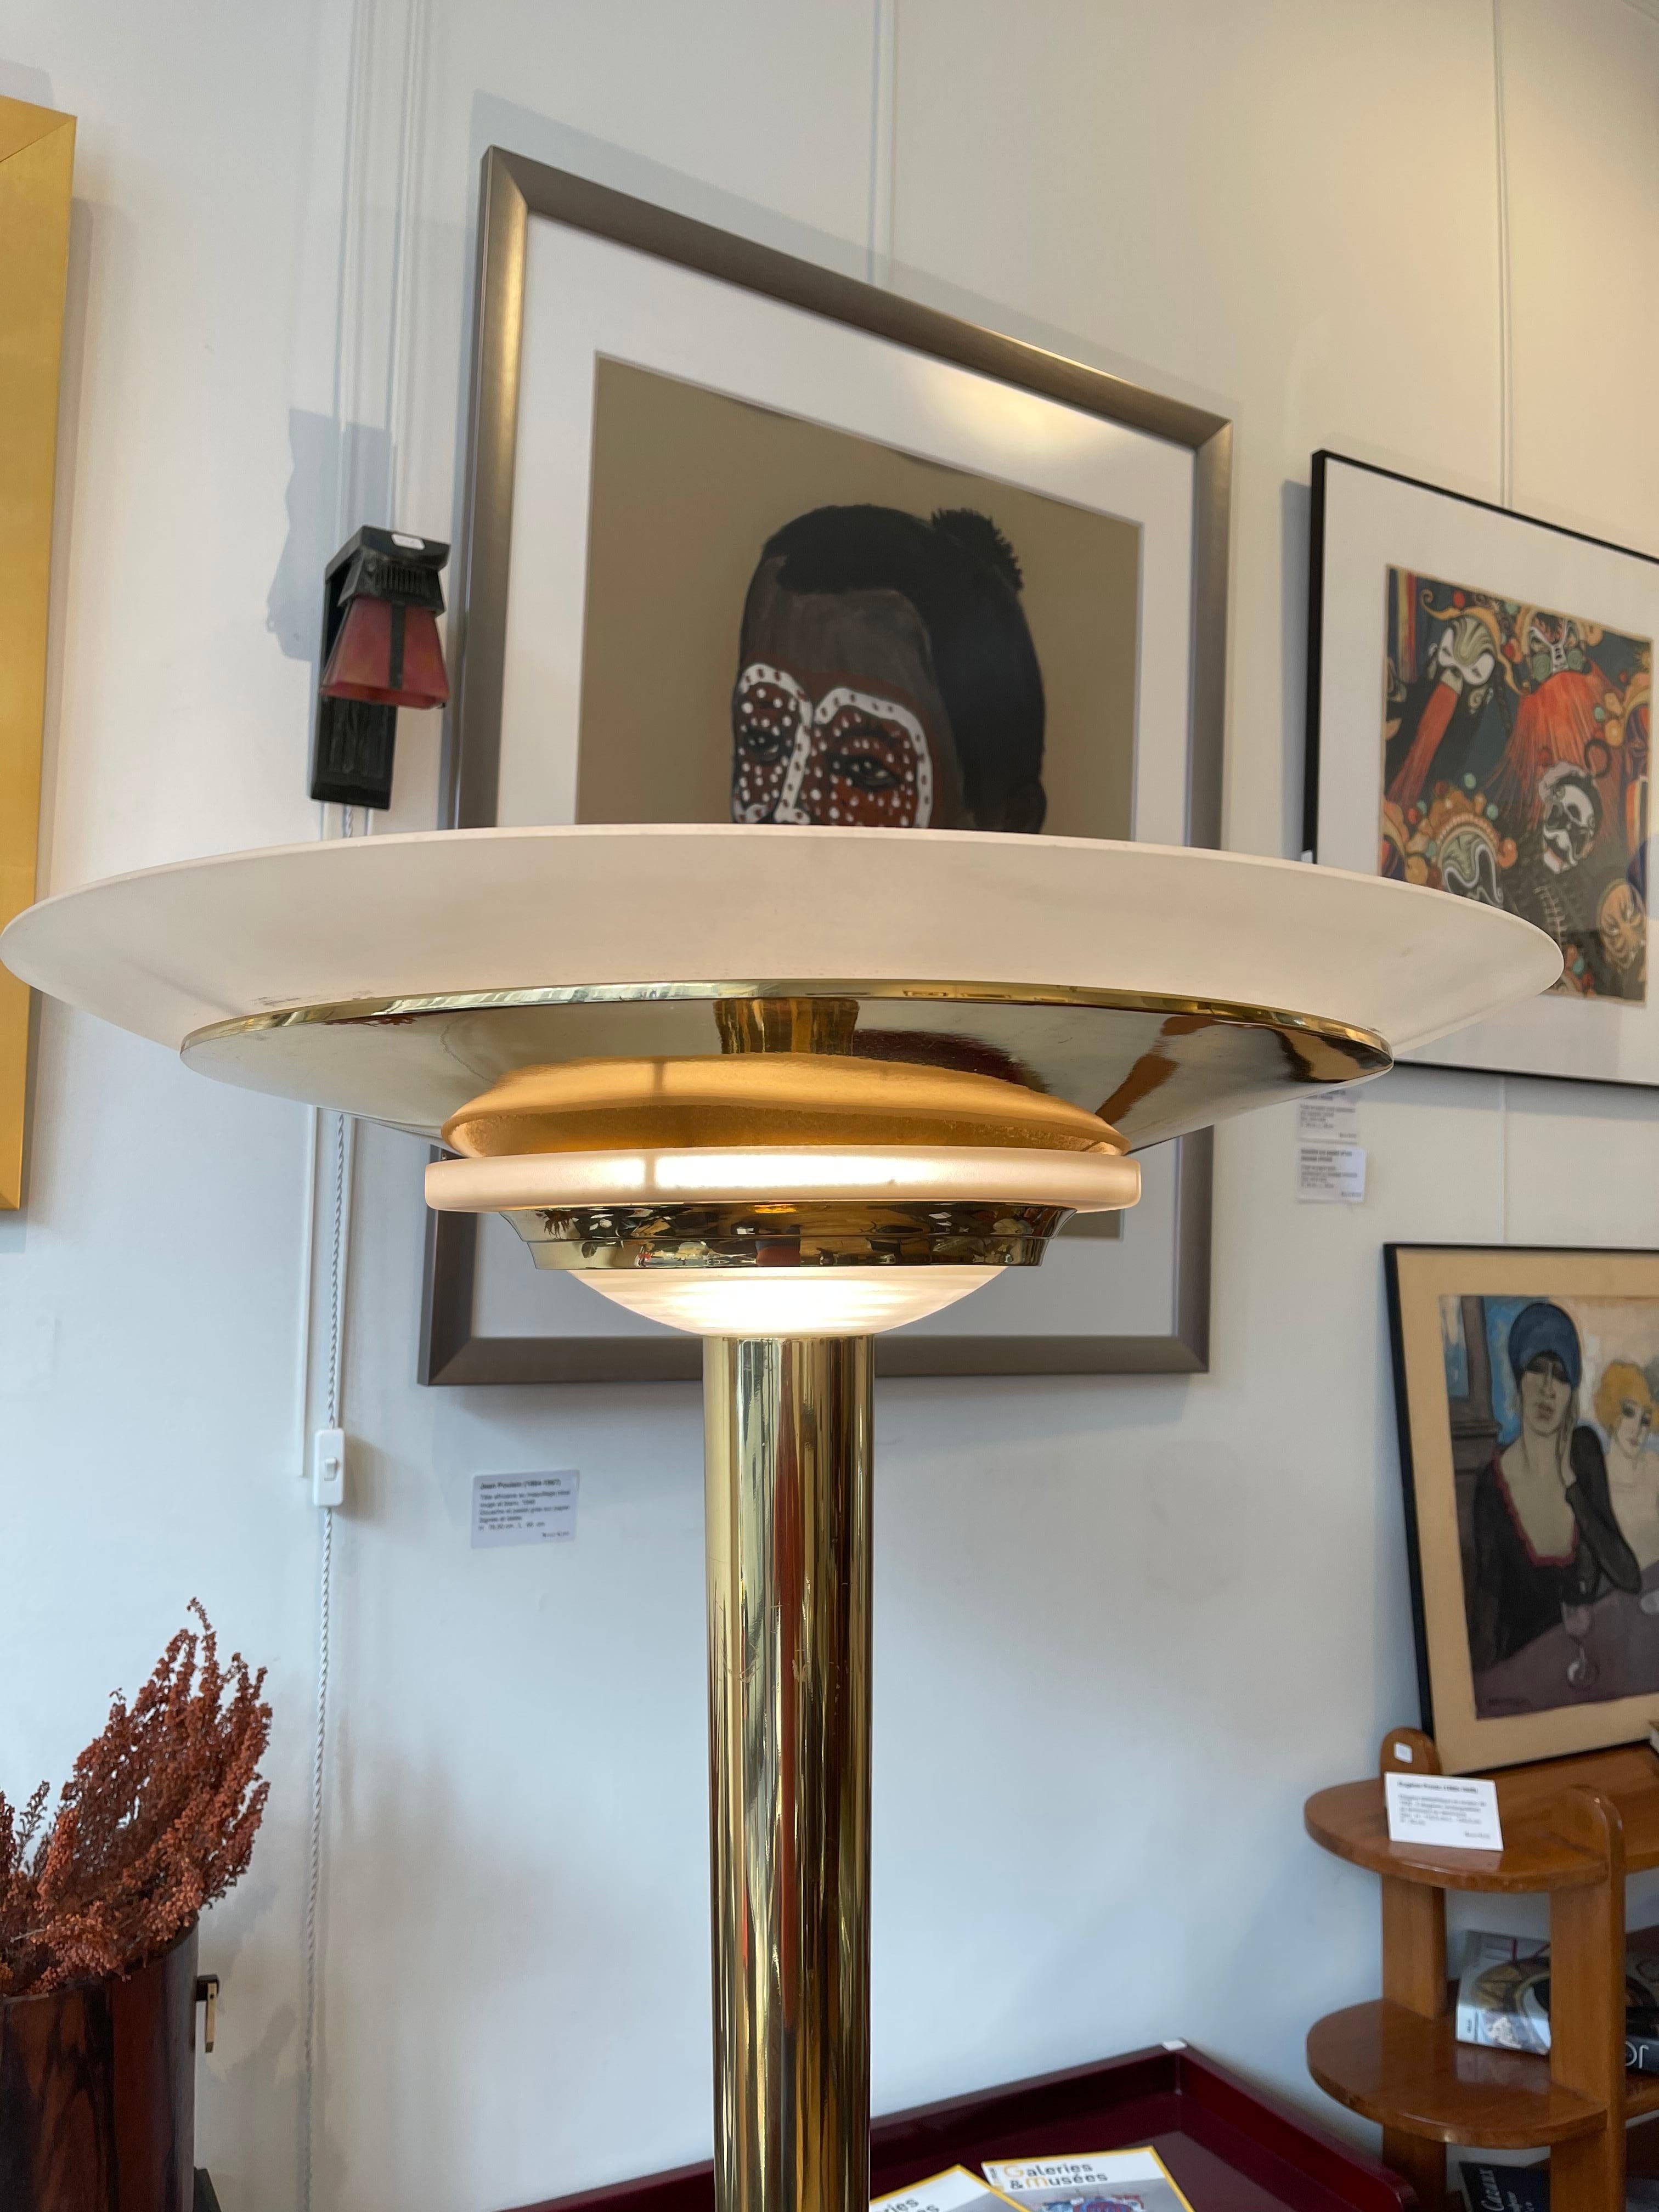 Iconic floor lamp by Jean Perzel, Model 41 E GM. Floor lamp made of gild brass and frosted glass. Signed on the base. Dimensions: hight 172cm, diameter of base 45cm, diameter at the top: 64.5cm
Jean Perzel is the most famous lamp maker of the